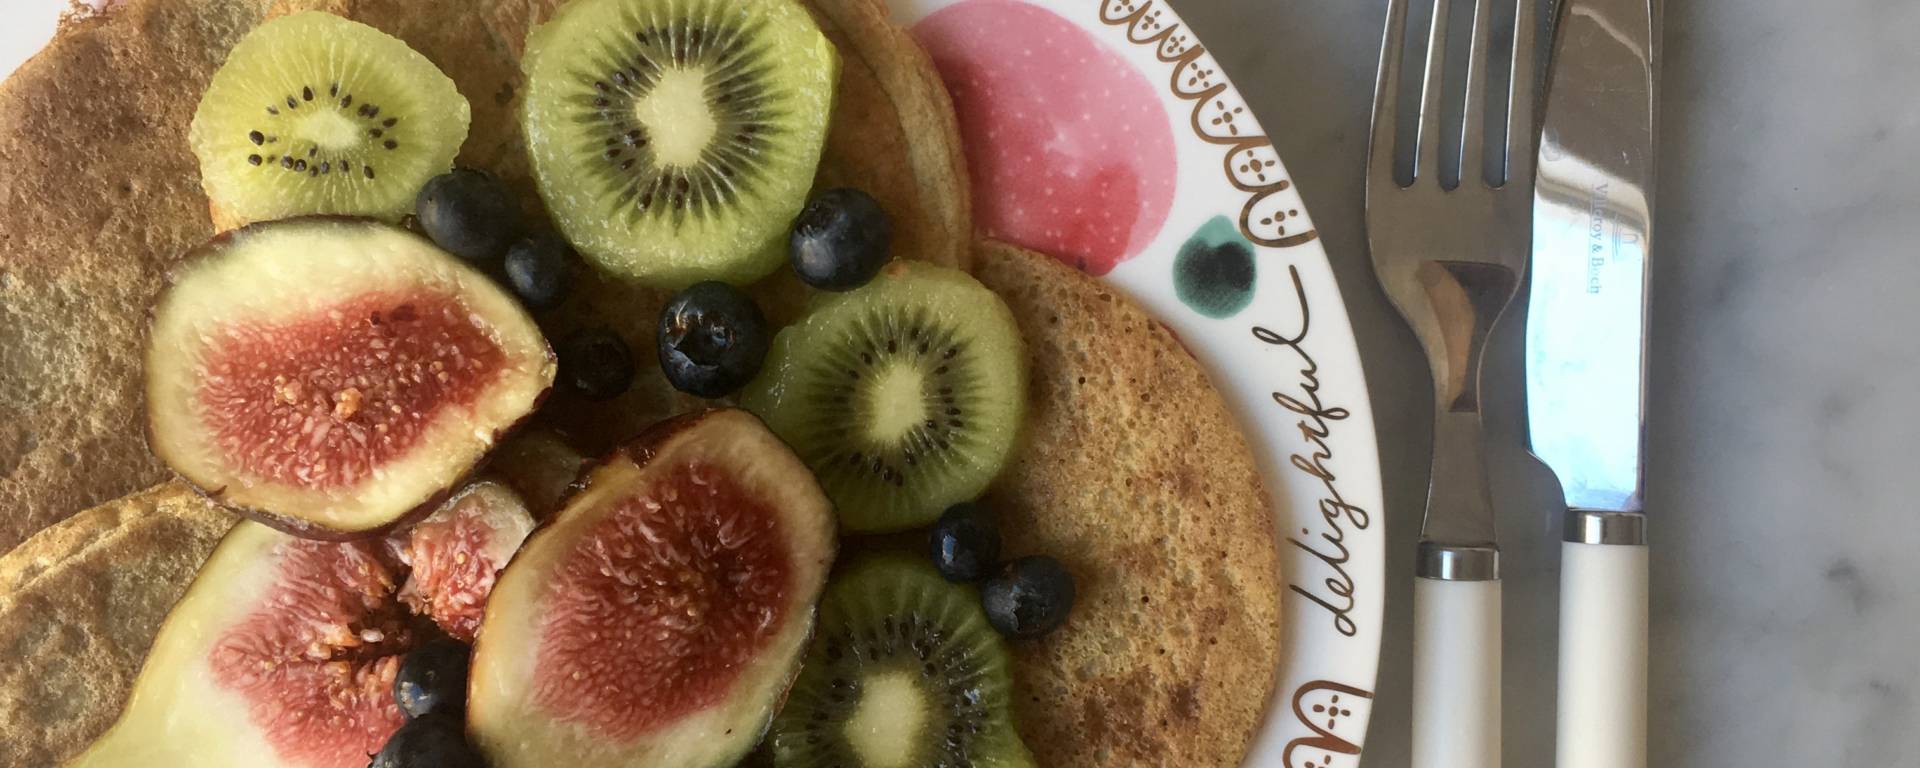 A delicious breakfast with yerba mate, pancakes, kiwis, figs and blueberries